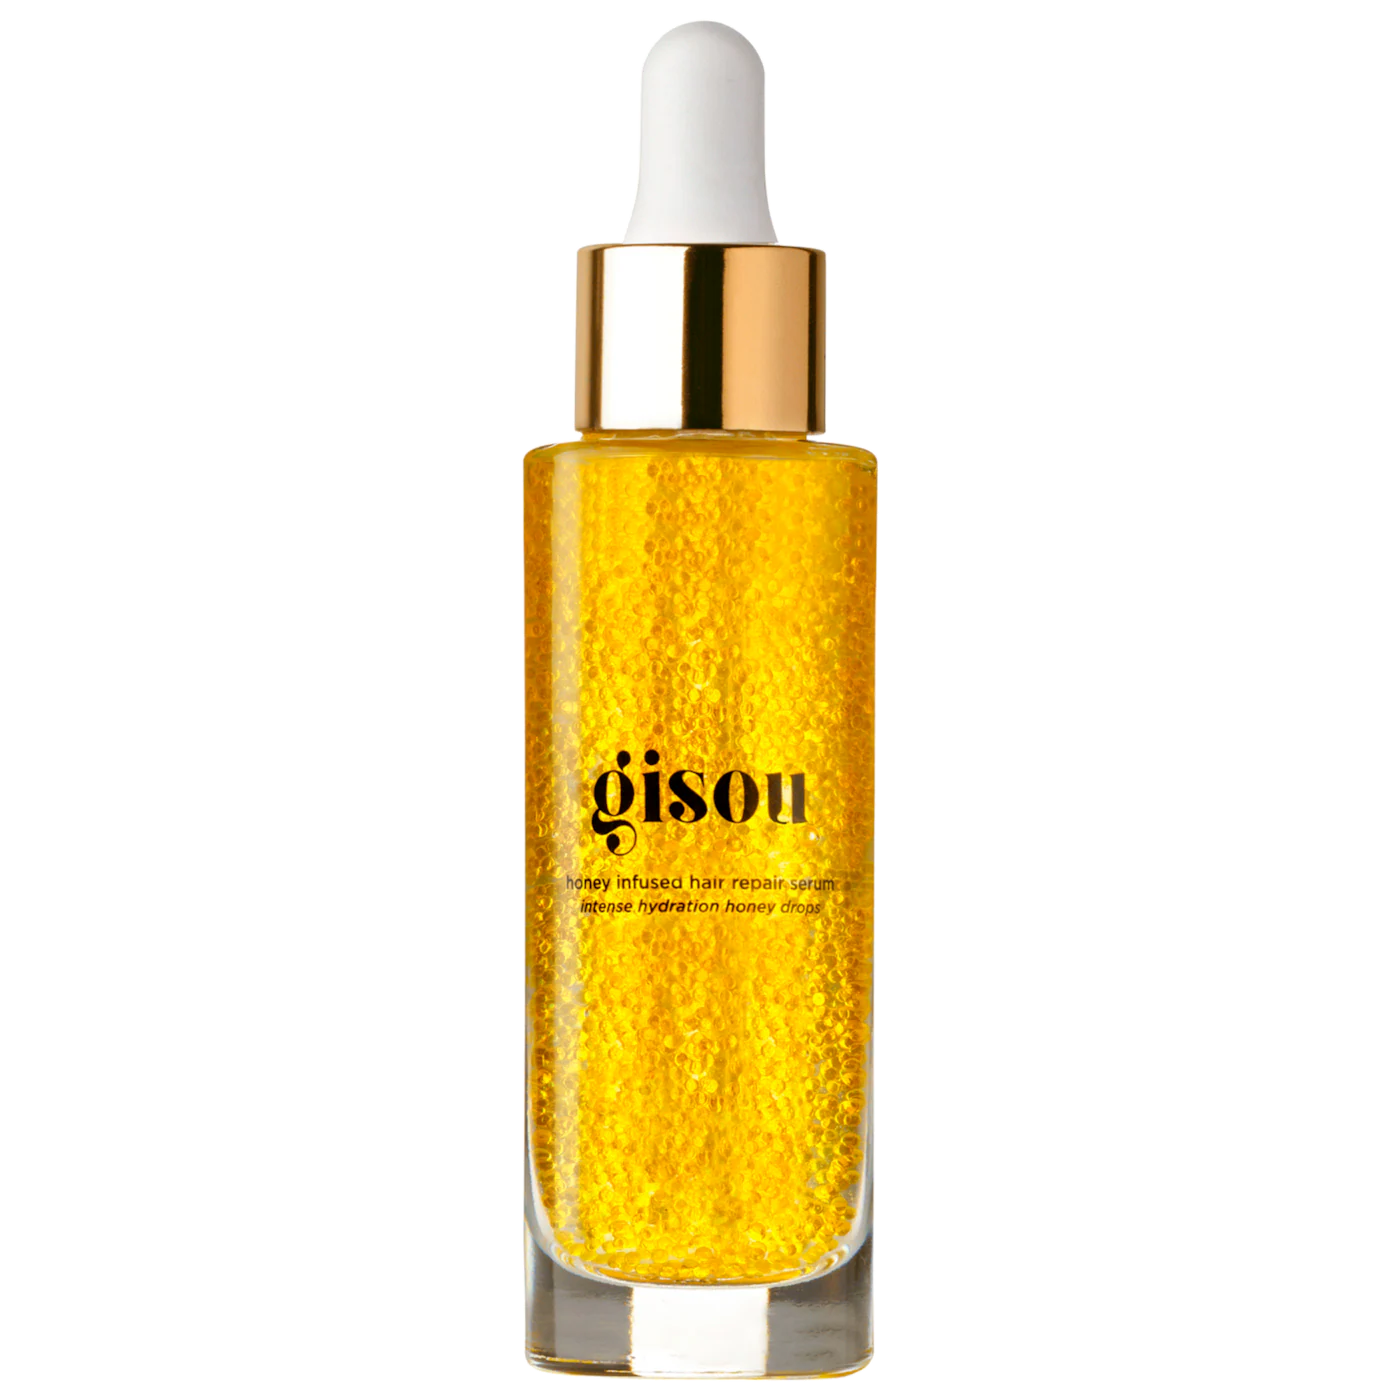 gisou honey infused hair repair serum, one of the best serums for dry hair